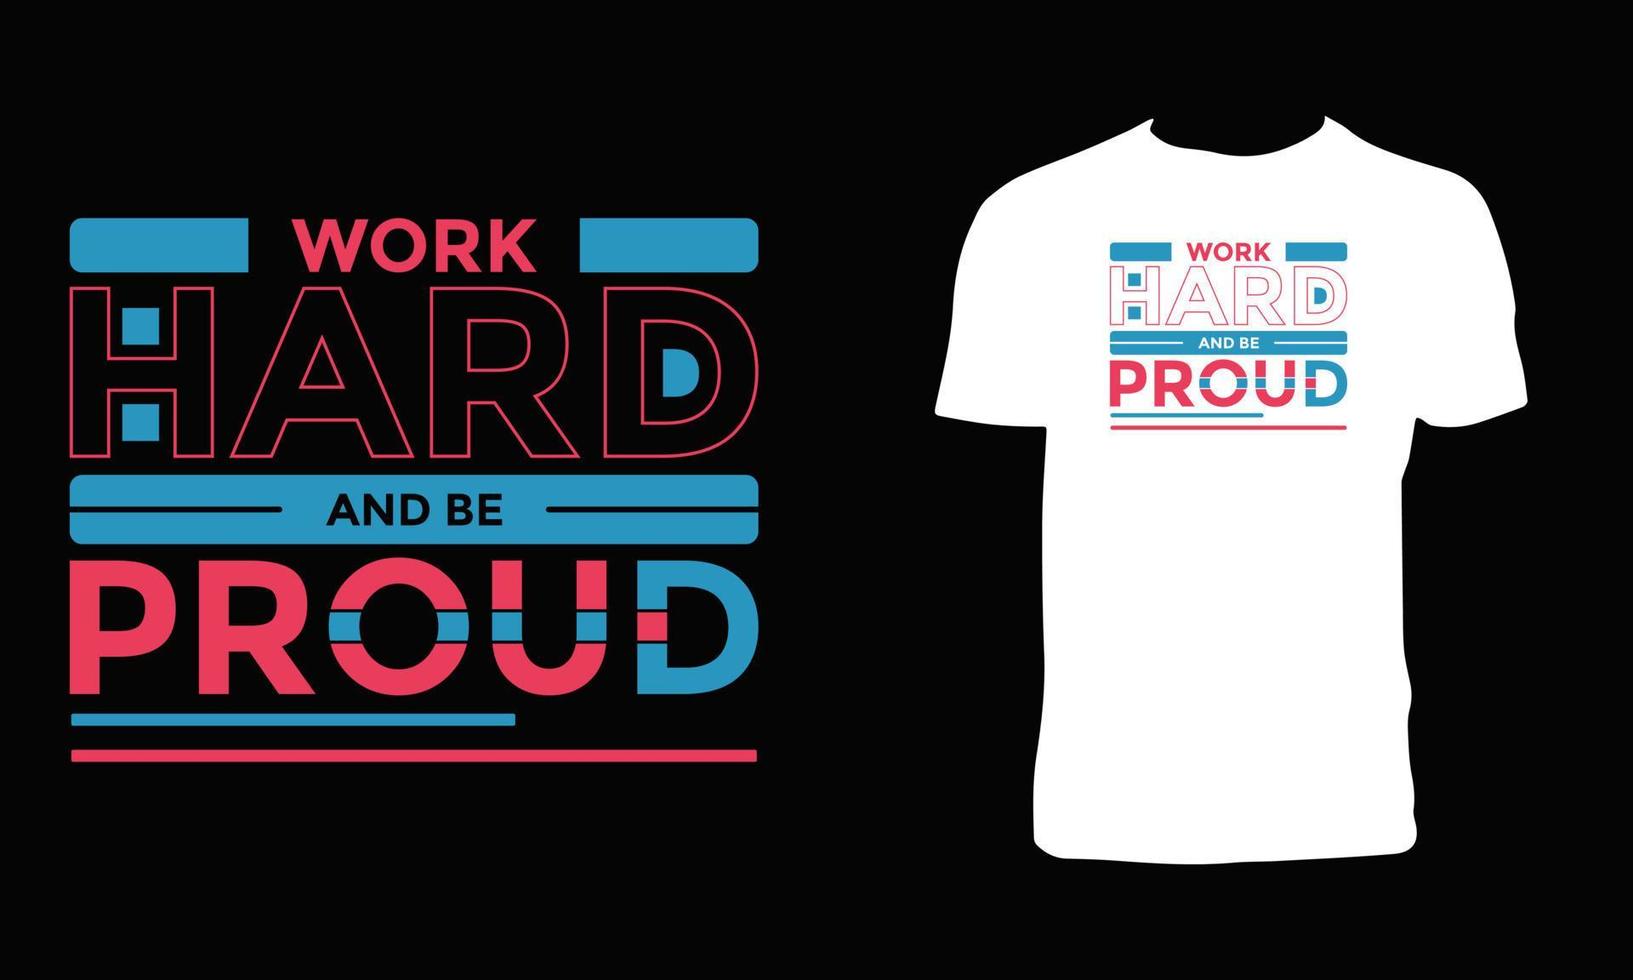 Work hard and be proud modern typography geometric inspirational quotes t shirt design. vector